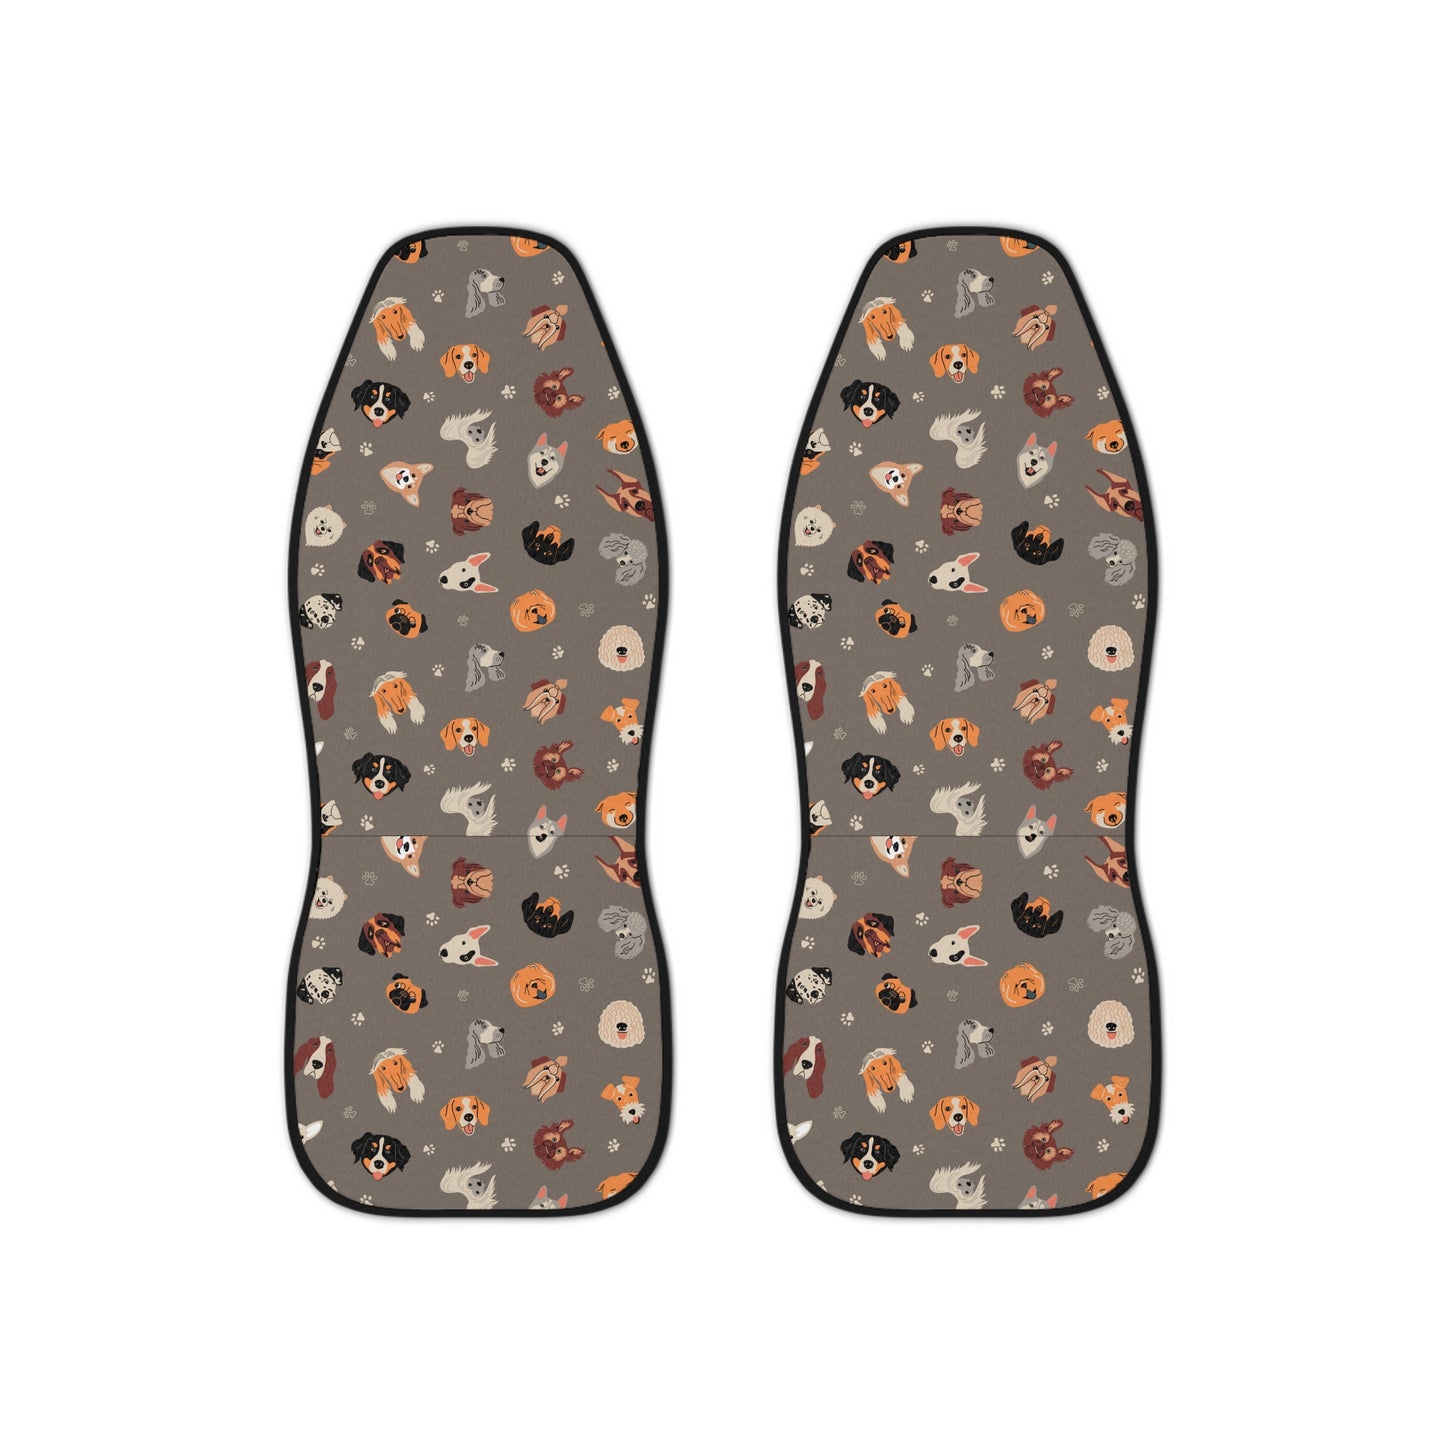 Gray Puppy Dog Patterned Car Seat Covers